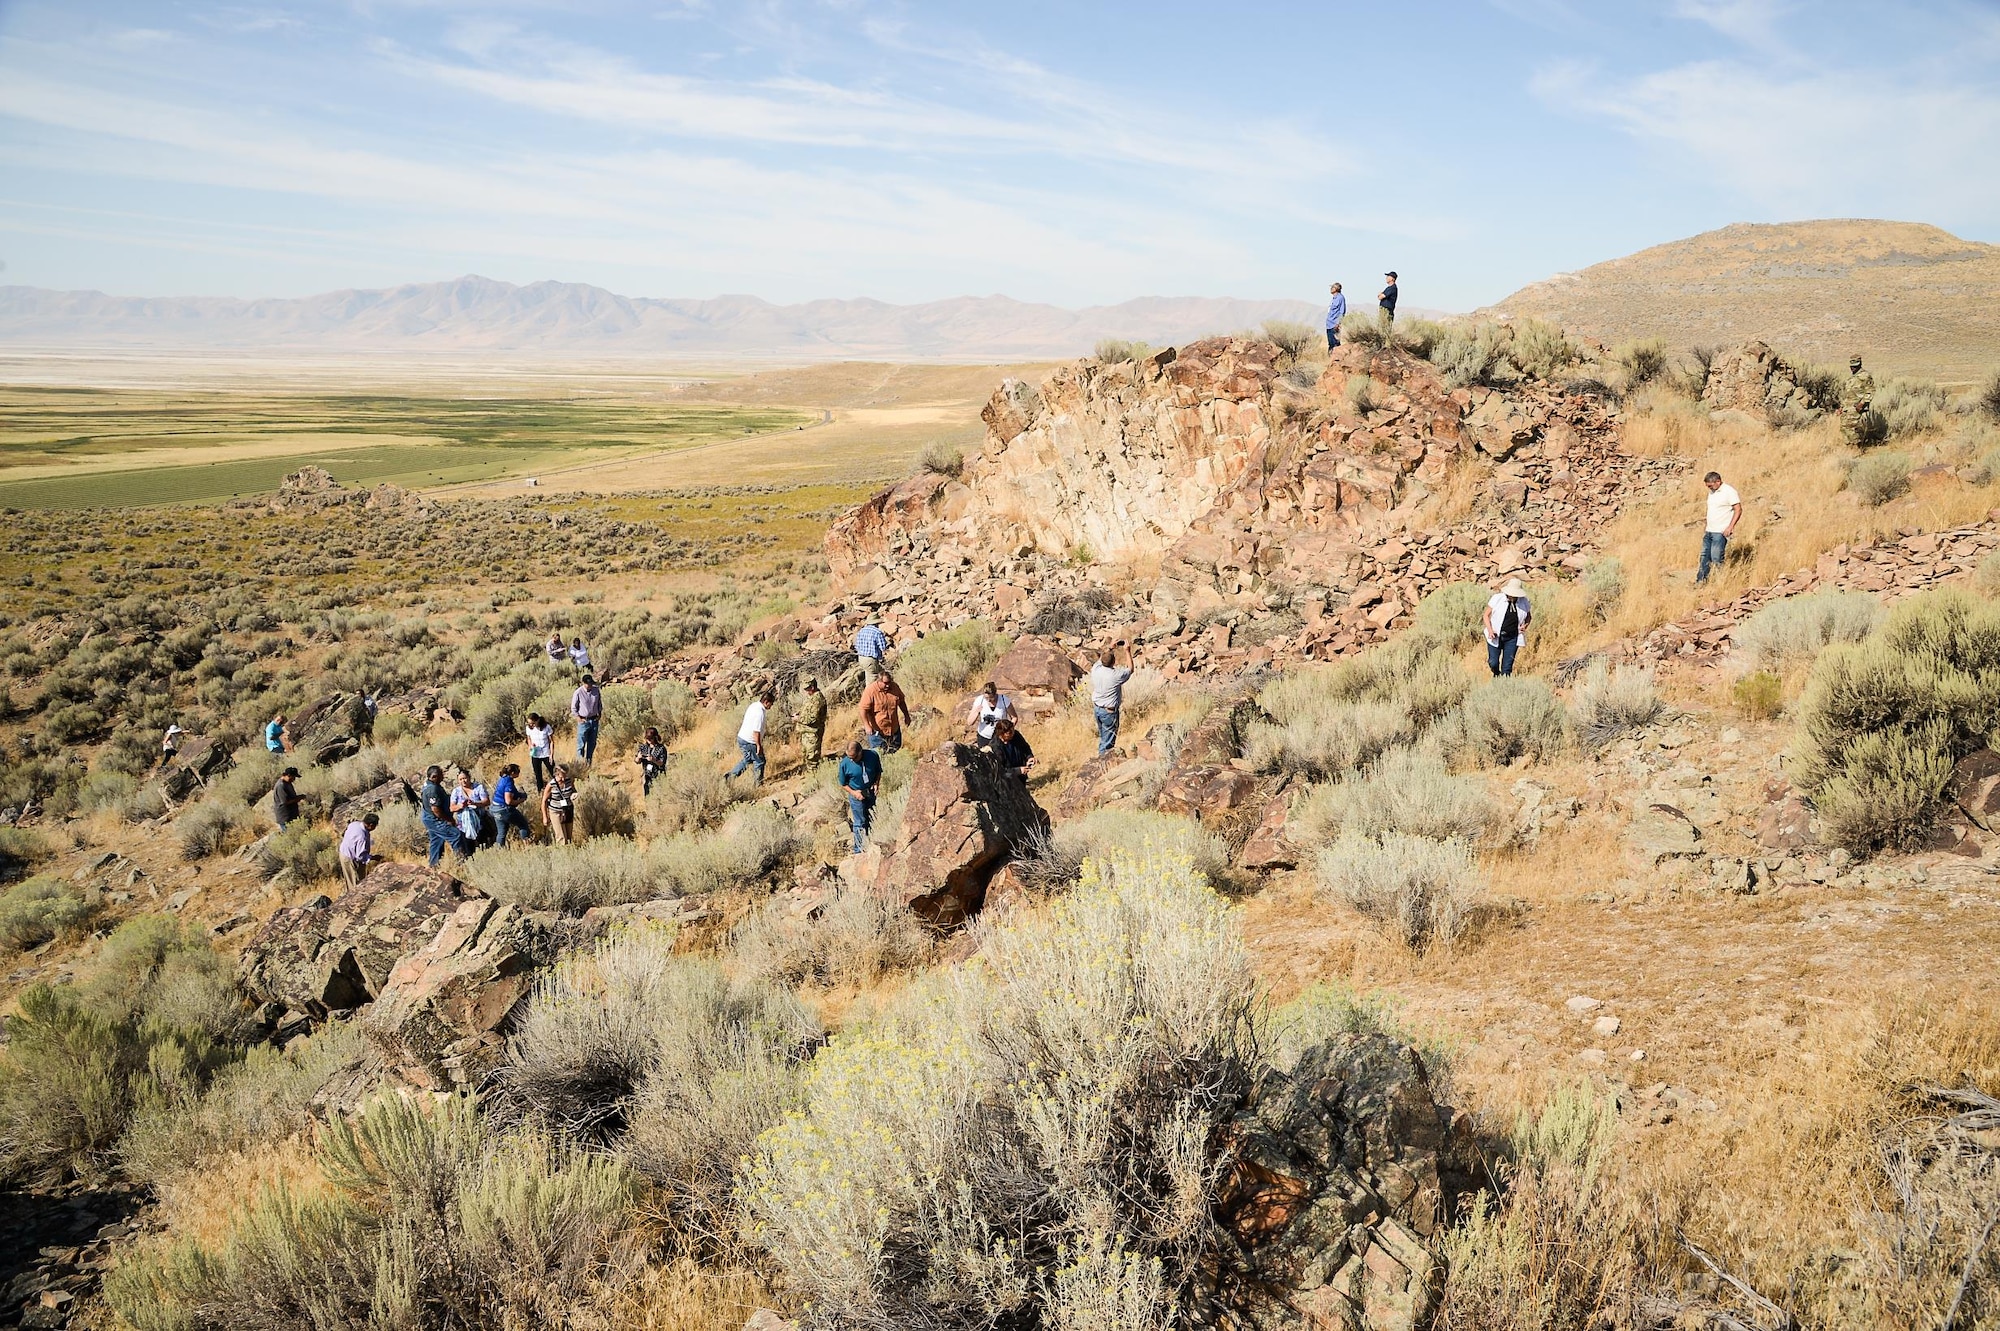 Attendees of the 2016 Annual American Indian Meeting climb a hillside in Box Elder County, Utah, during a guided tour of a petroglyph site, Aug. 26, 2016. (U.S. Air Force photo by R. Nial Bradshaw)